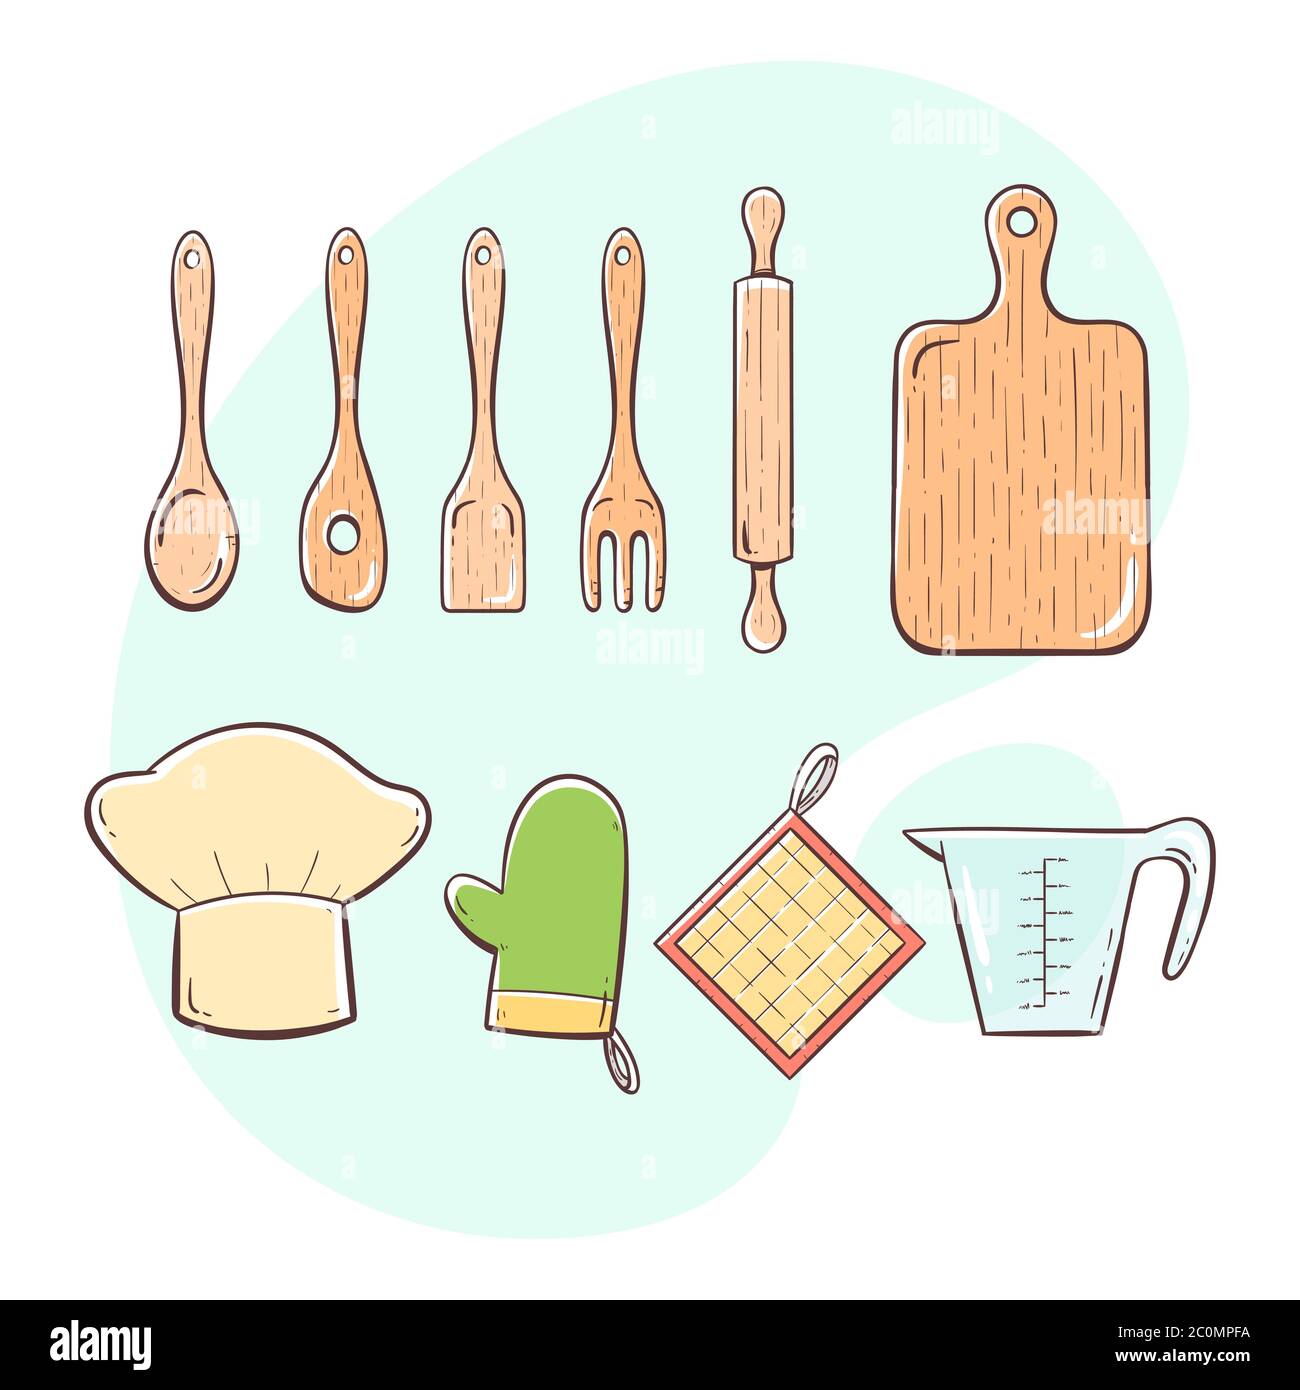 https://c8.alamy.com/comp/2C0MPFA/cooking-tools-collection-of-kitchen-utensils-for-cooking-serving-stirring-and-cutting-hand-drawn-colorful-style-collection-2C0MPFA.jpg